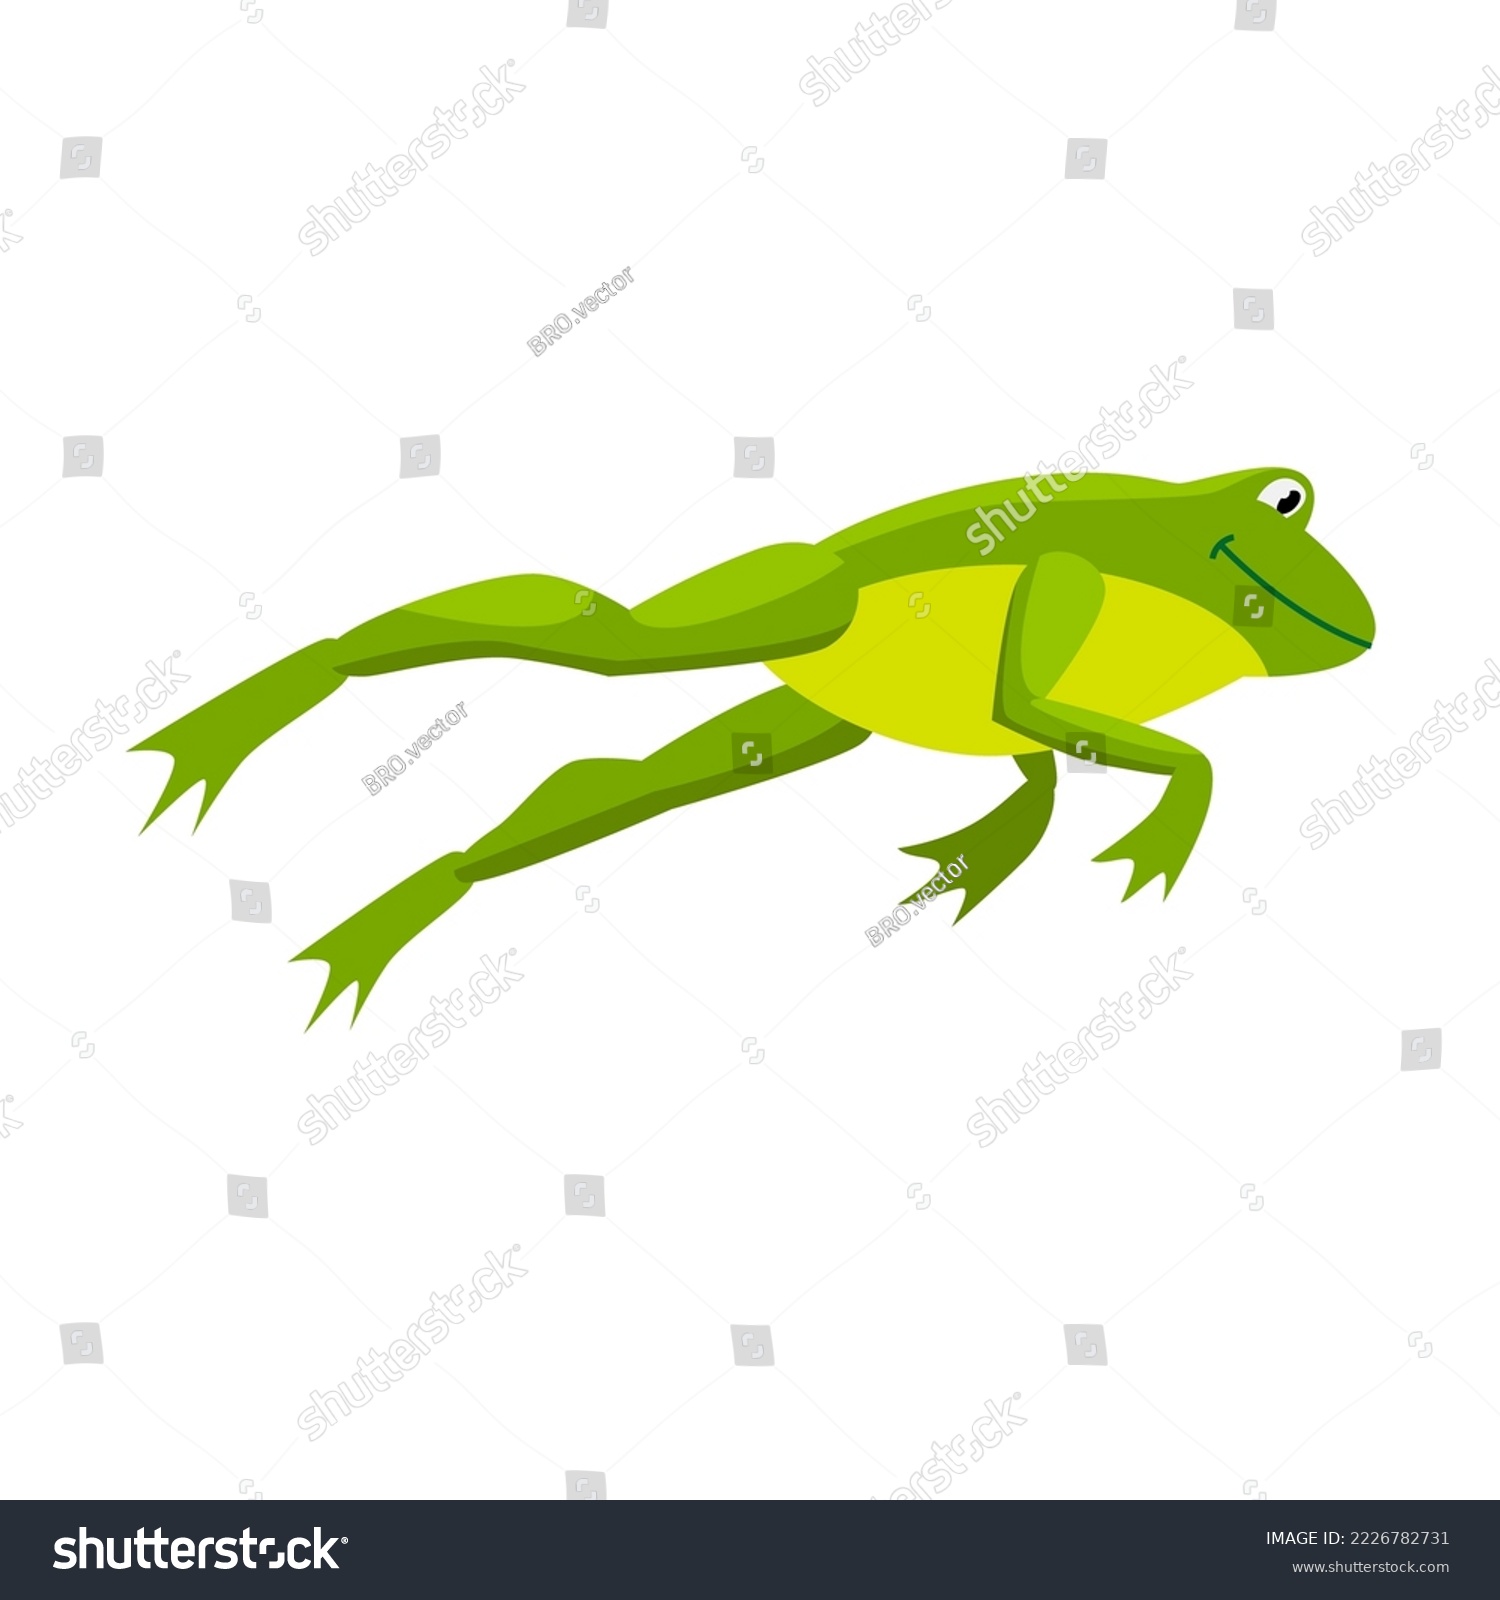 SVG of Green frog jumping for prey. Cartoon vector illustration. Leaping toad on white background. Funny water animal. Nature, movement, amphibia, reptile, fauna concept for design svg